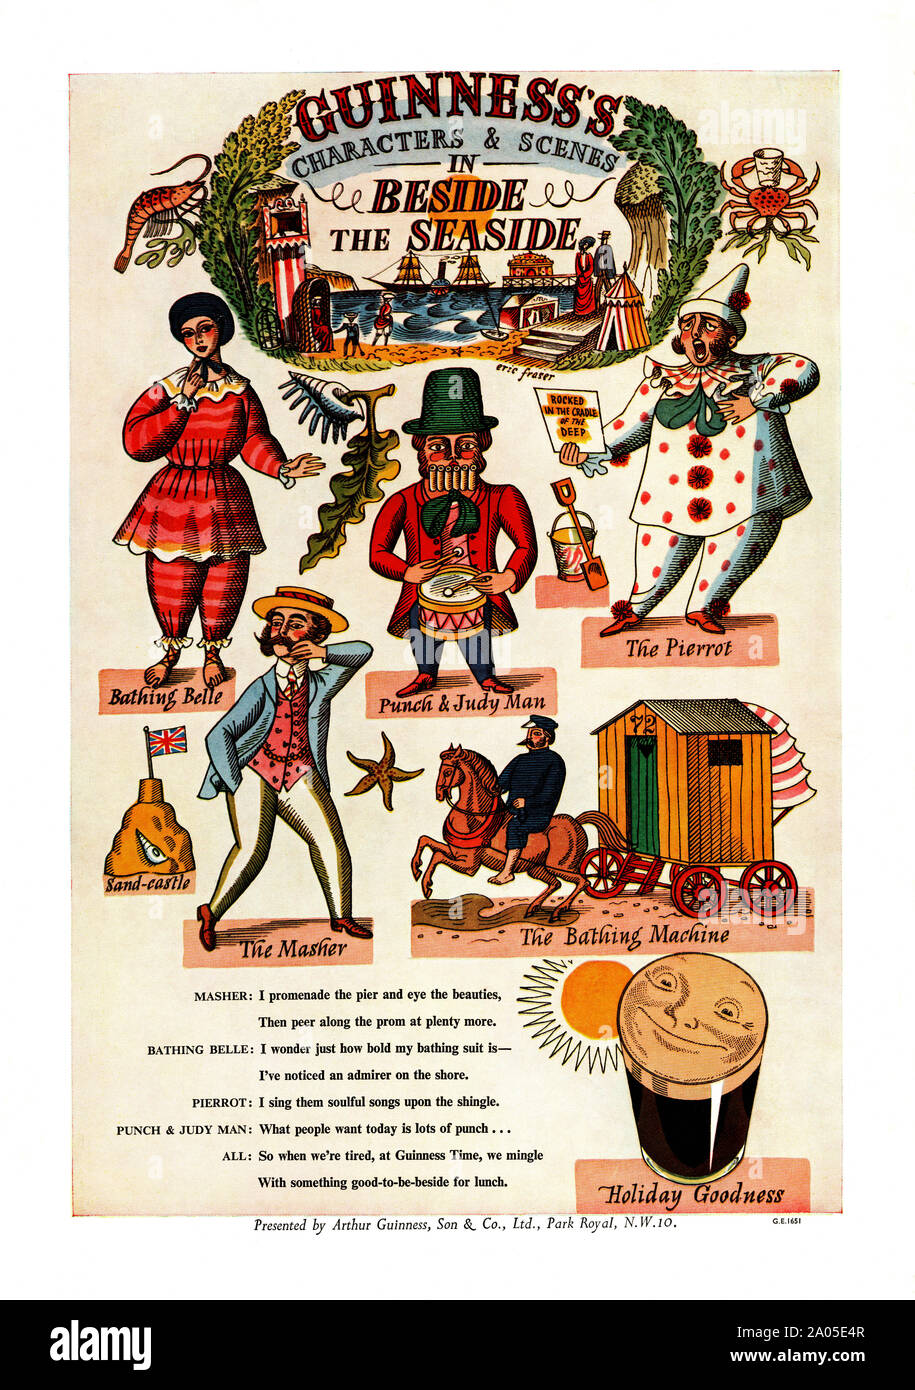 Advert for Guinness stout, 1951. The illustration shows scenes 'beside the seaside' including a Punch and Judy character and a bathing machine. Guinness is a dark Irish dry stout that originated at the brewery of Arthur Guinness (1725–1803) at St. James's Gate Brewery in Dublin, Ireland. Stock Photo